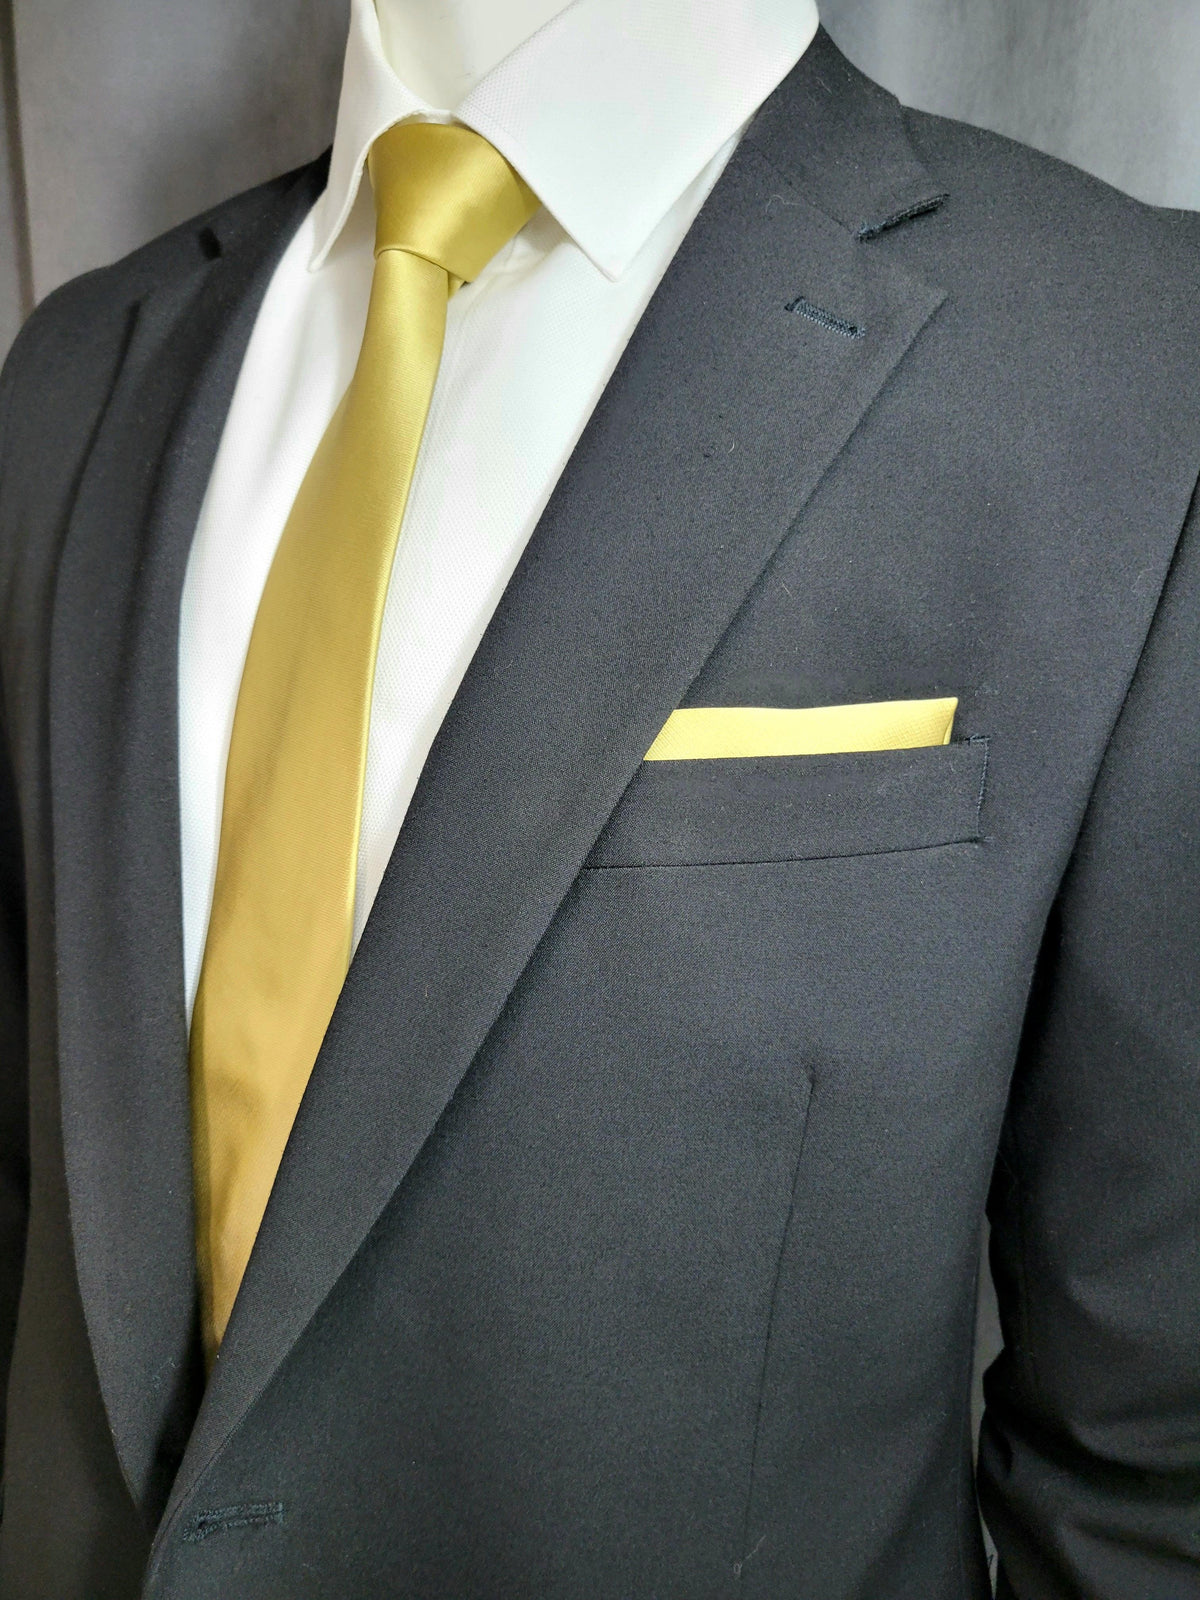 Gold Honey Necktie and Pocket Square - The Upscale Banker